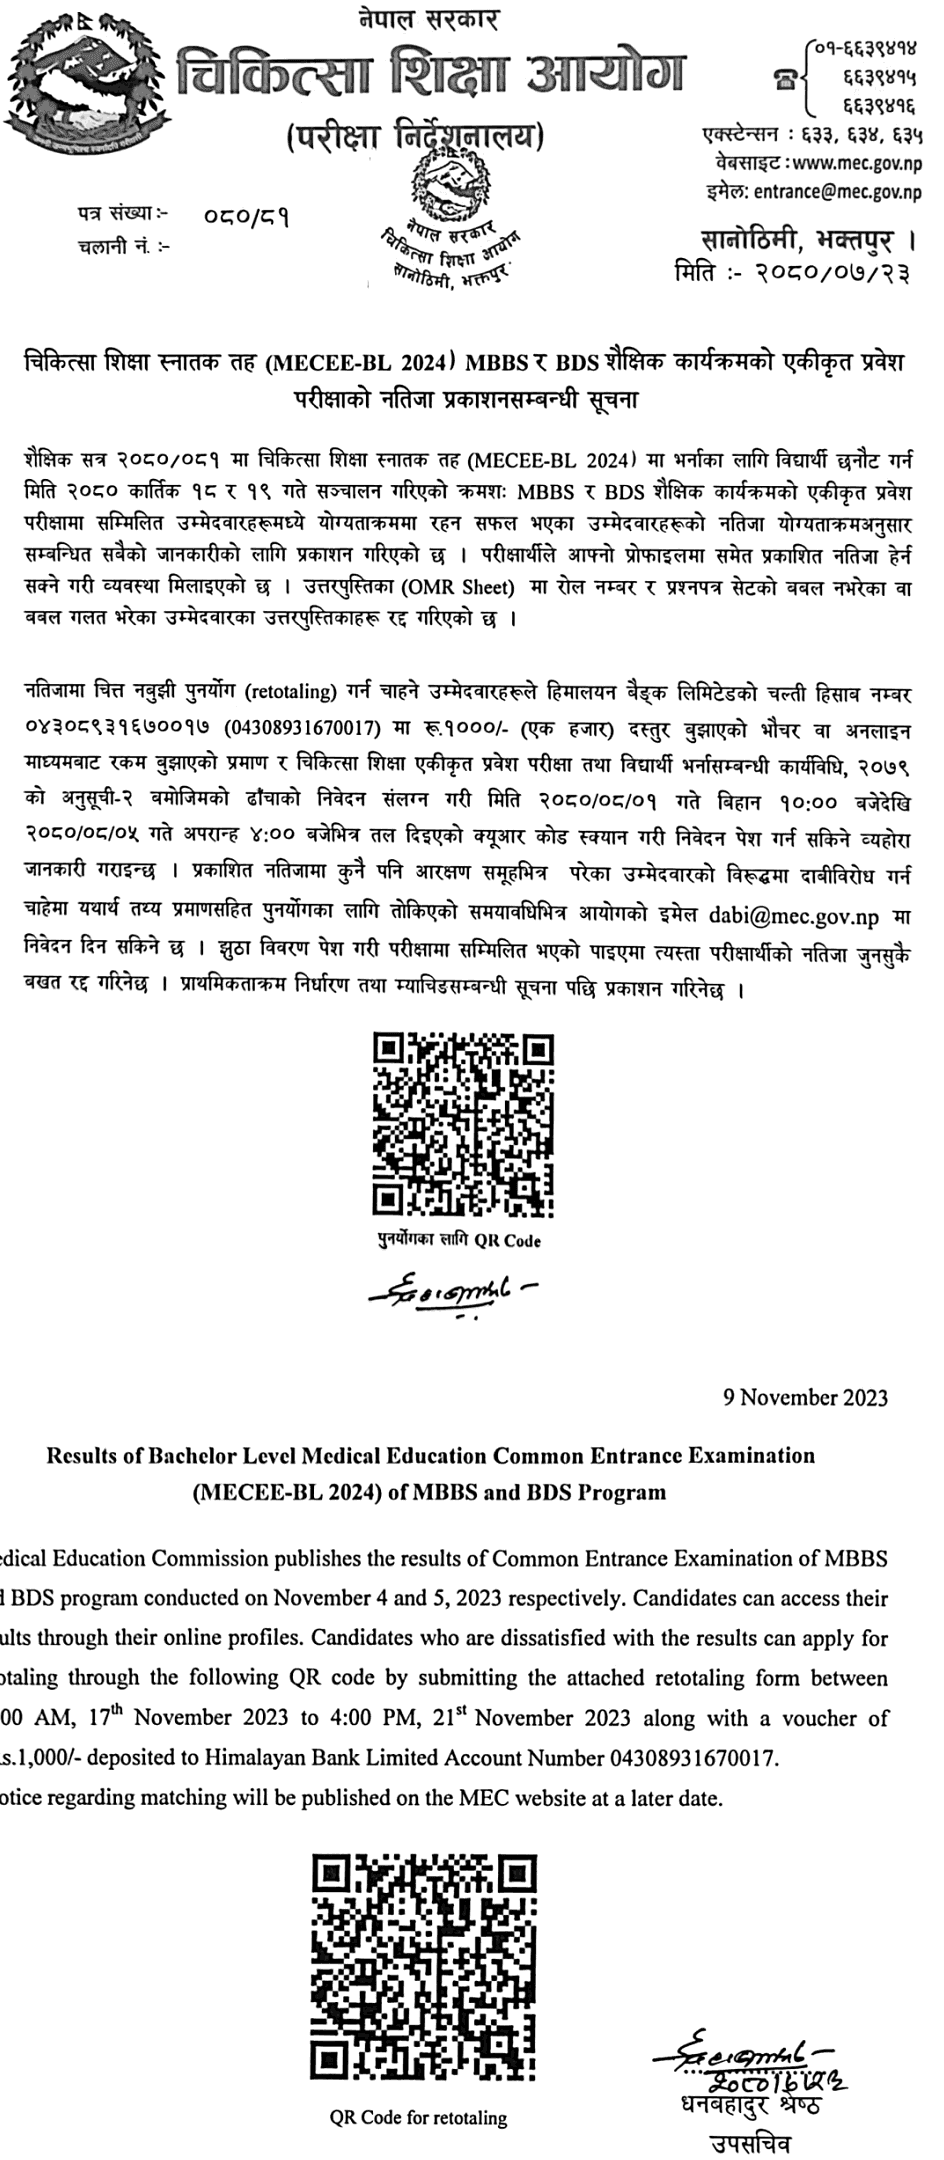 MECEE BL of MBBS and BDS Program Result List 2024